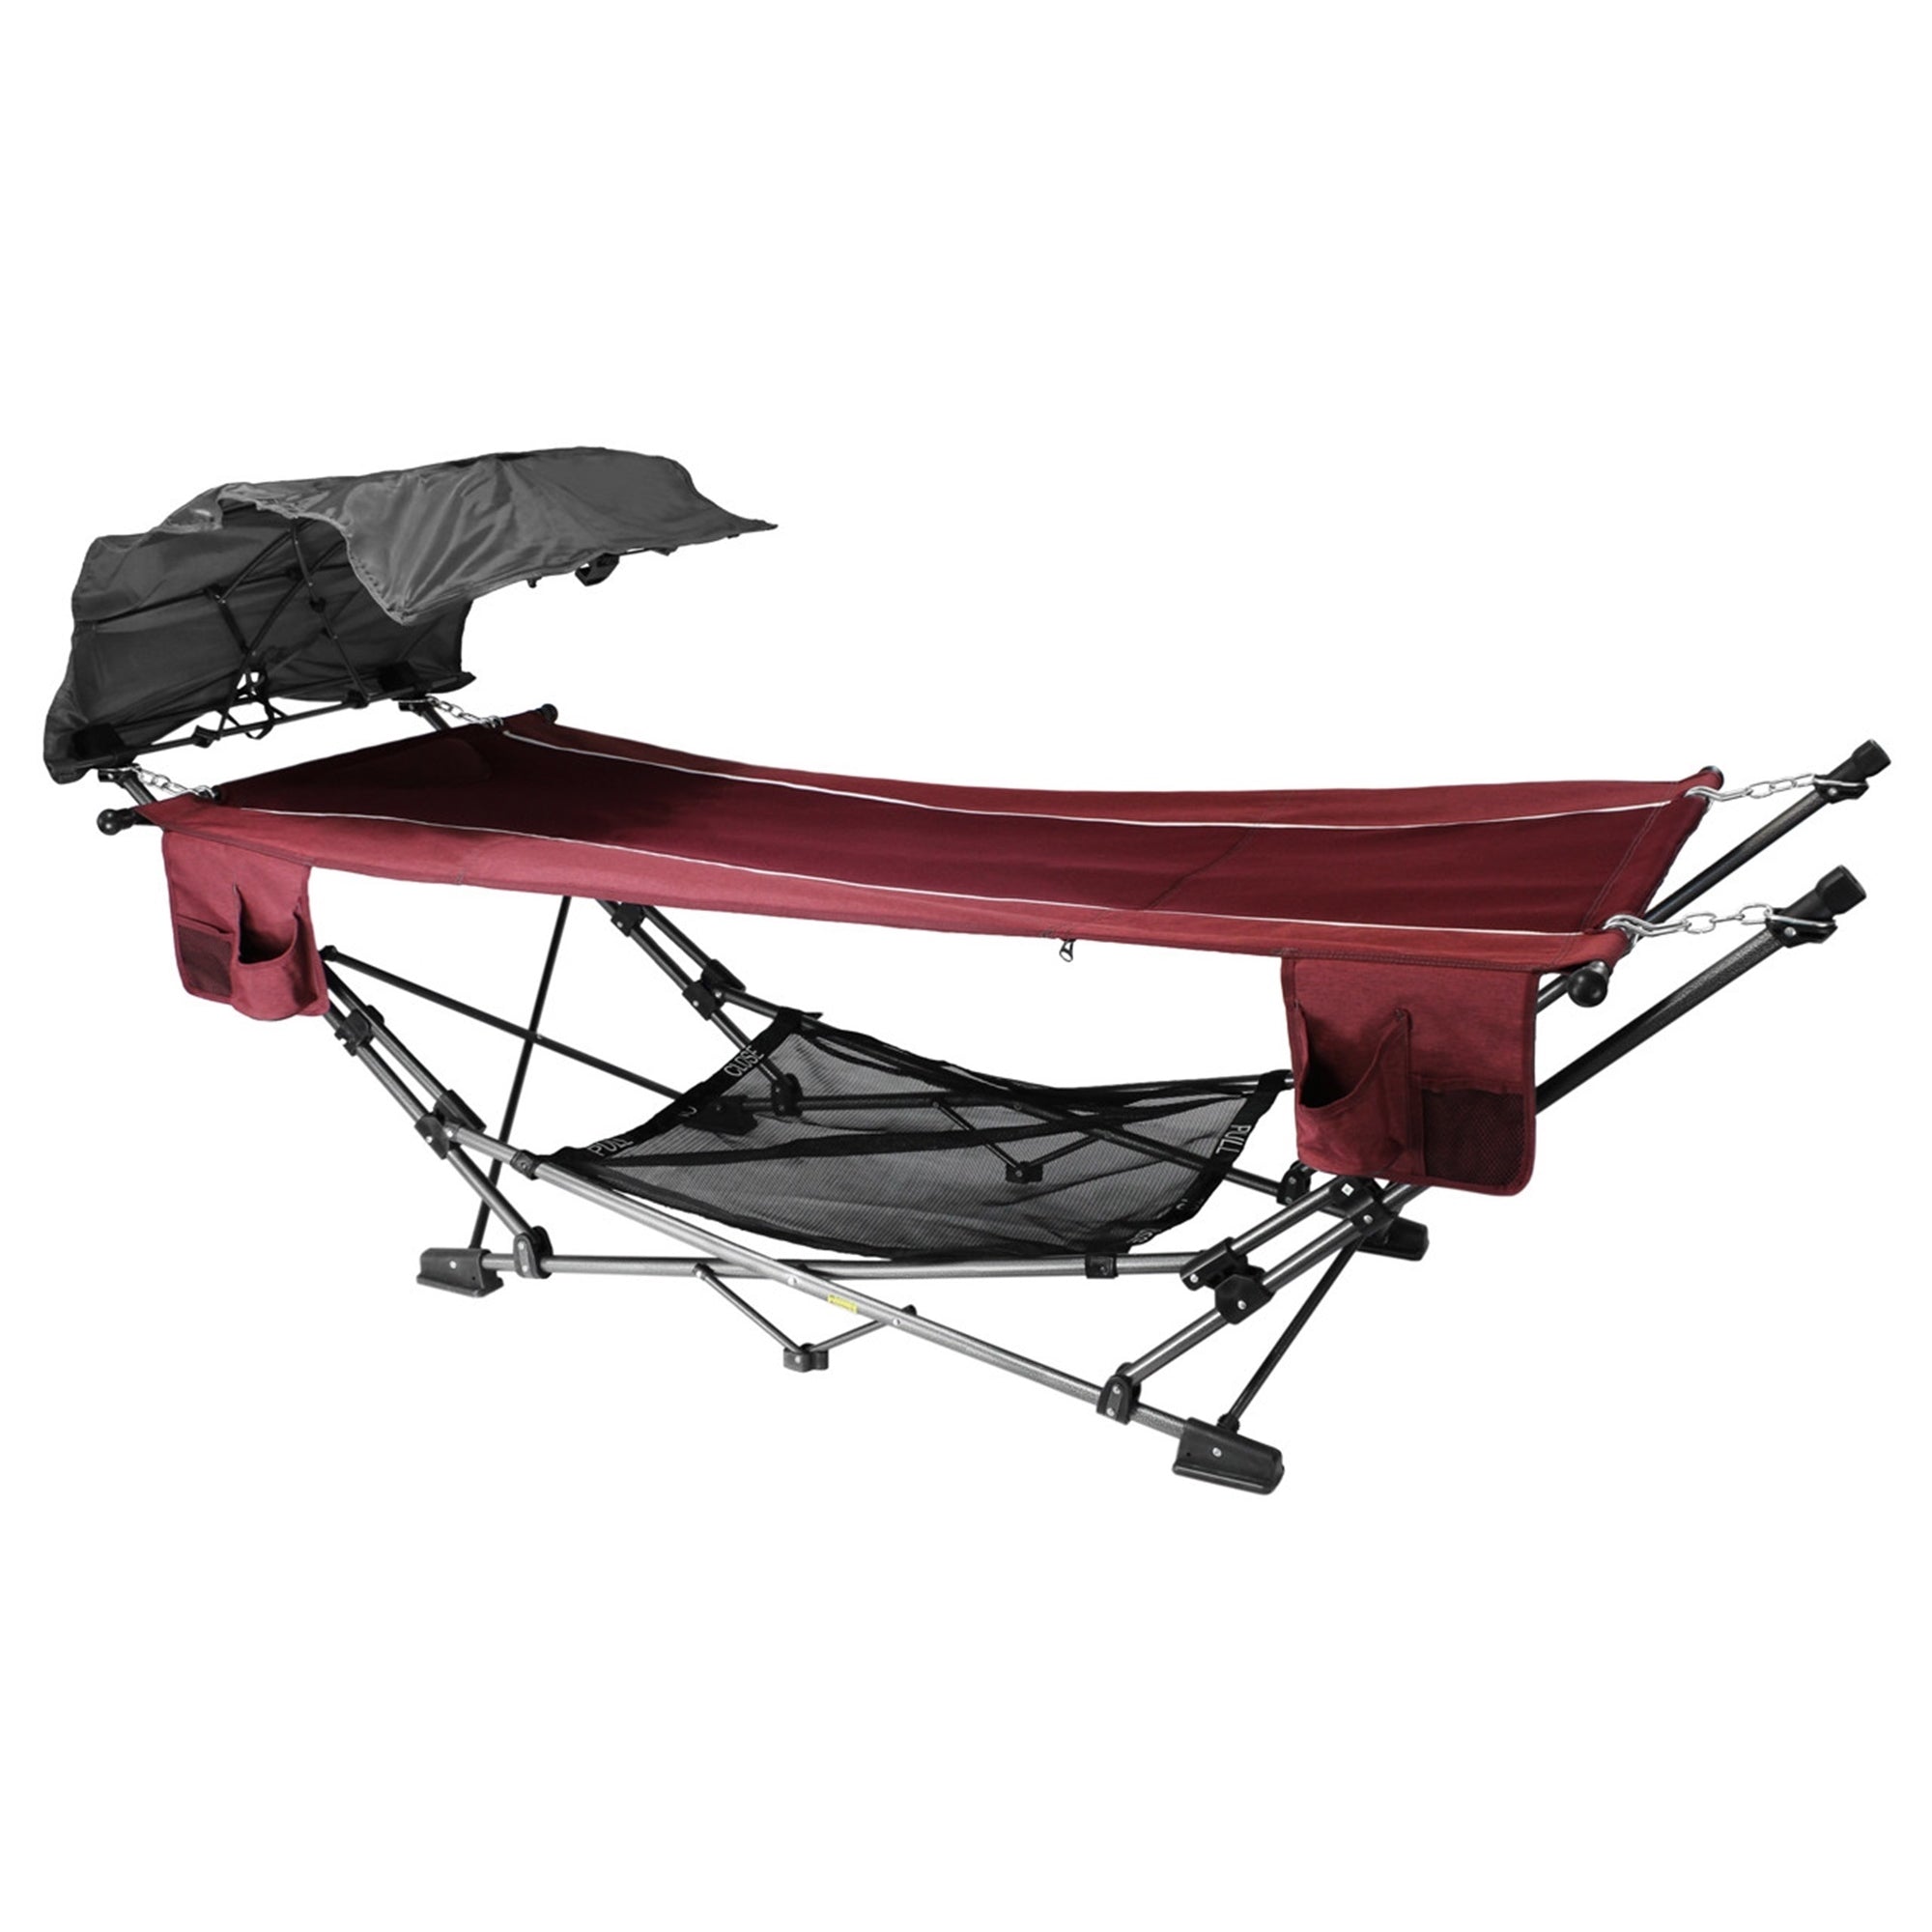 Zenithen Limited Portable Folding Hammock with a Retractable Canopy, Red